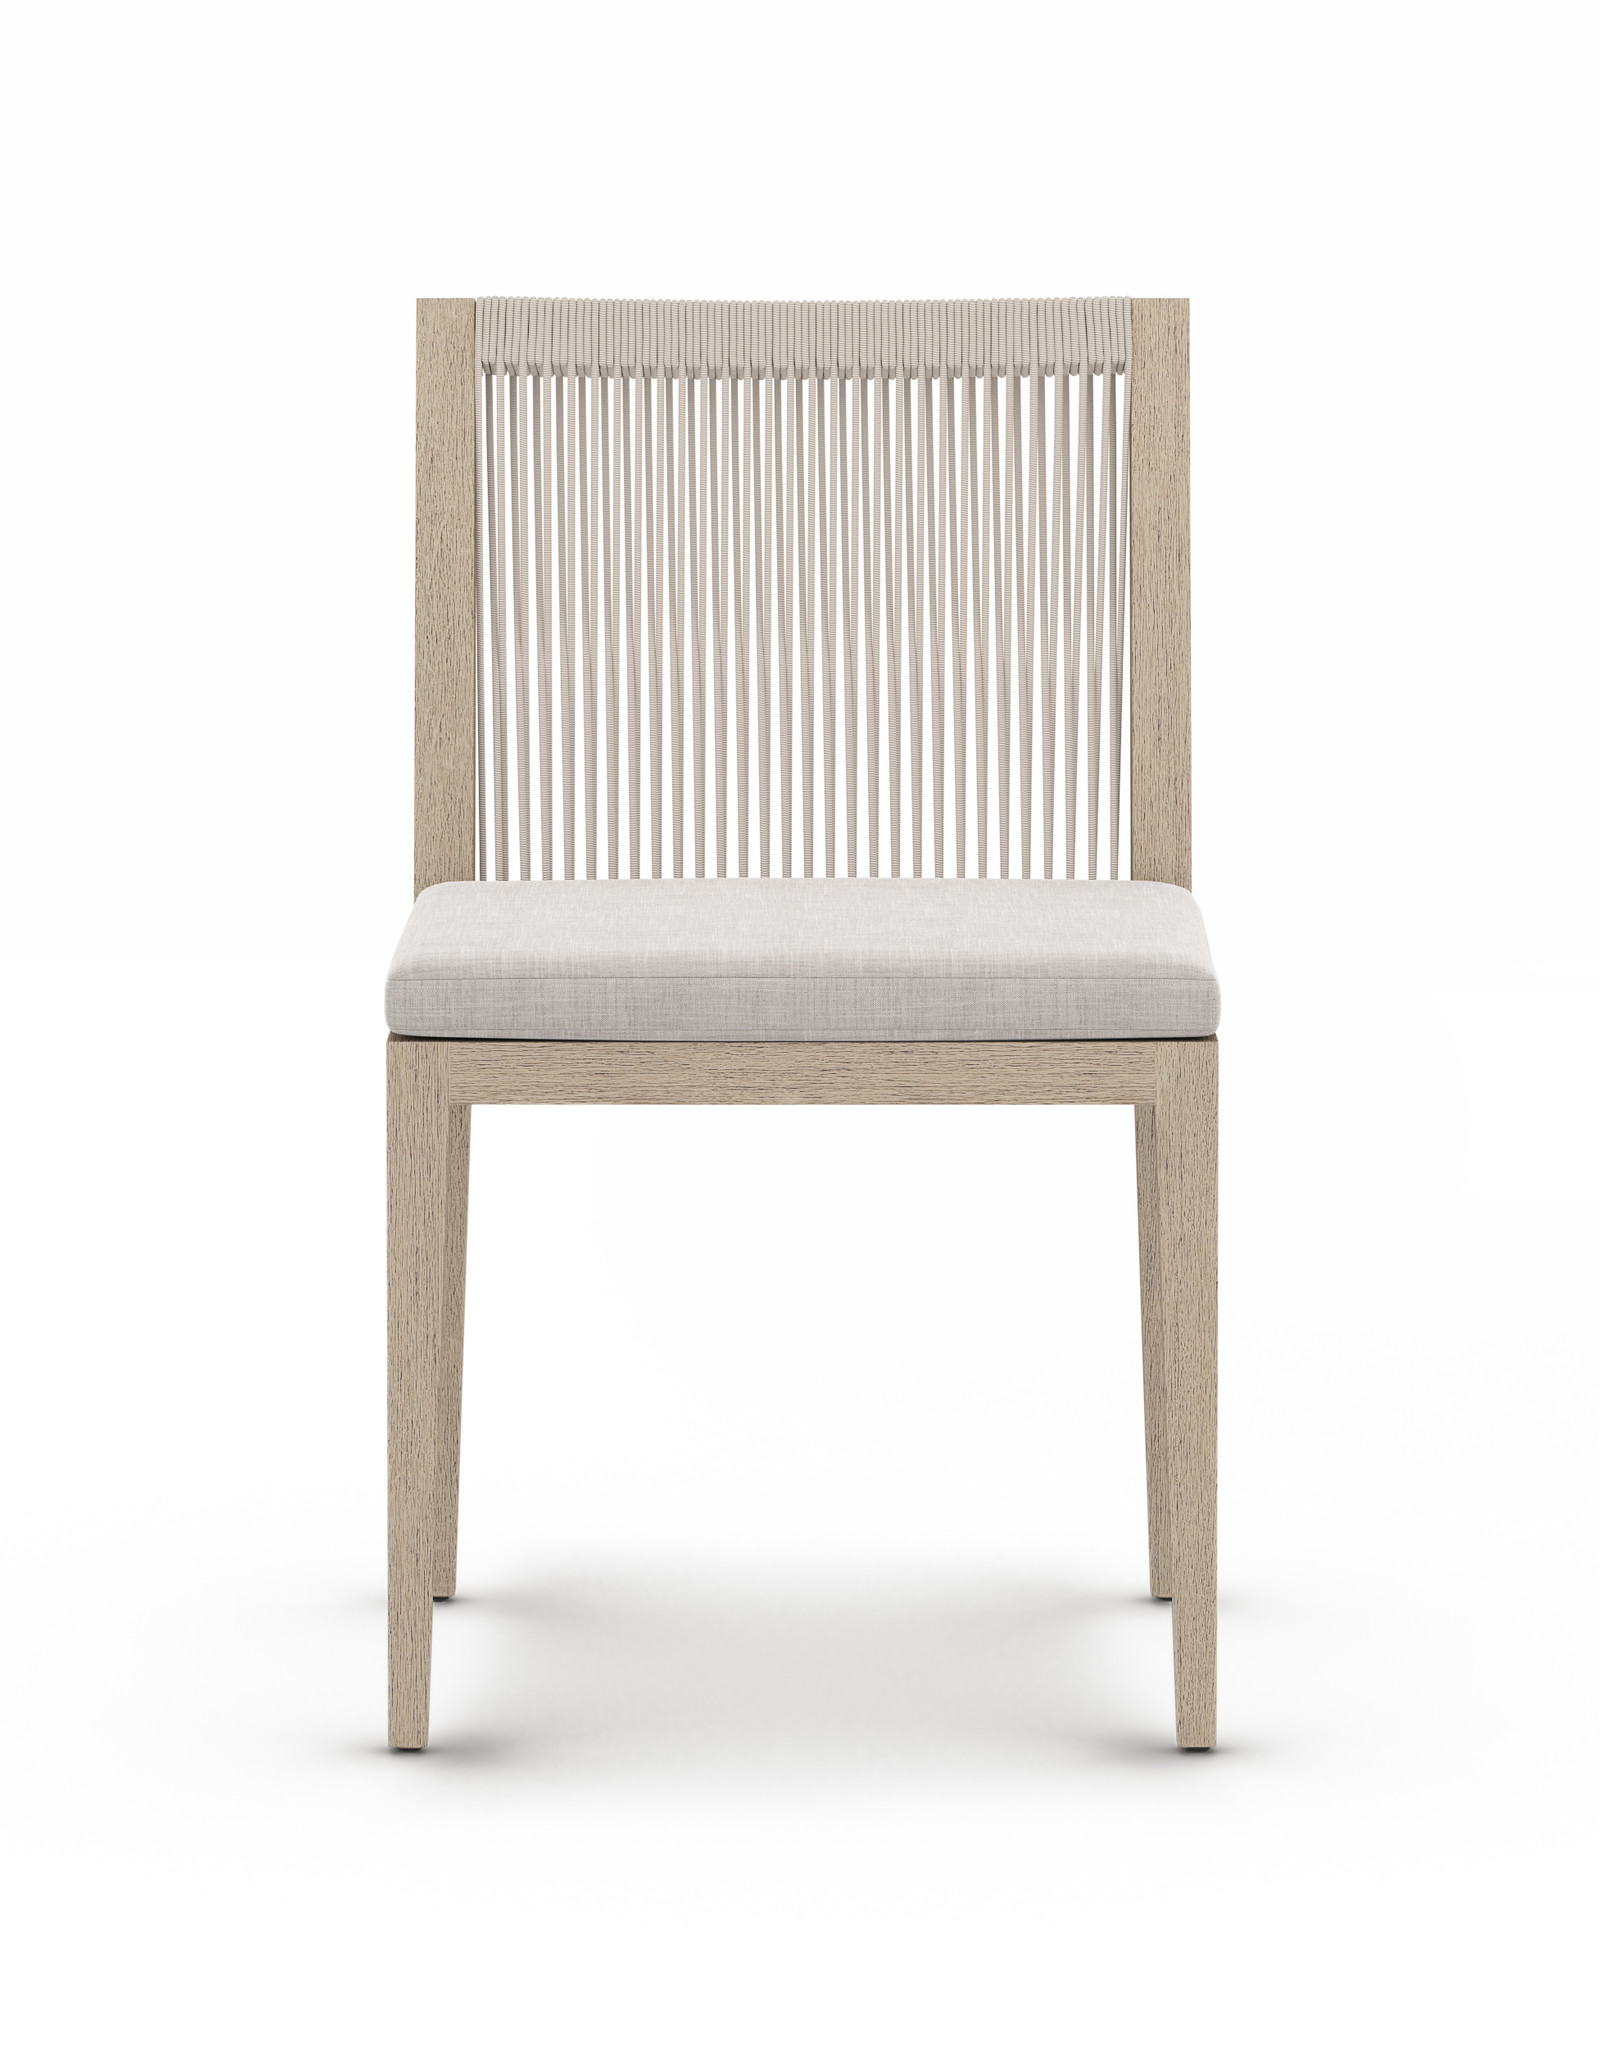 Sherwood Outdoor Dining Chair, Armless